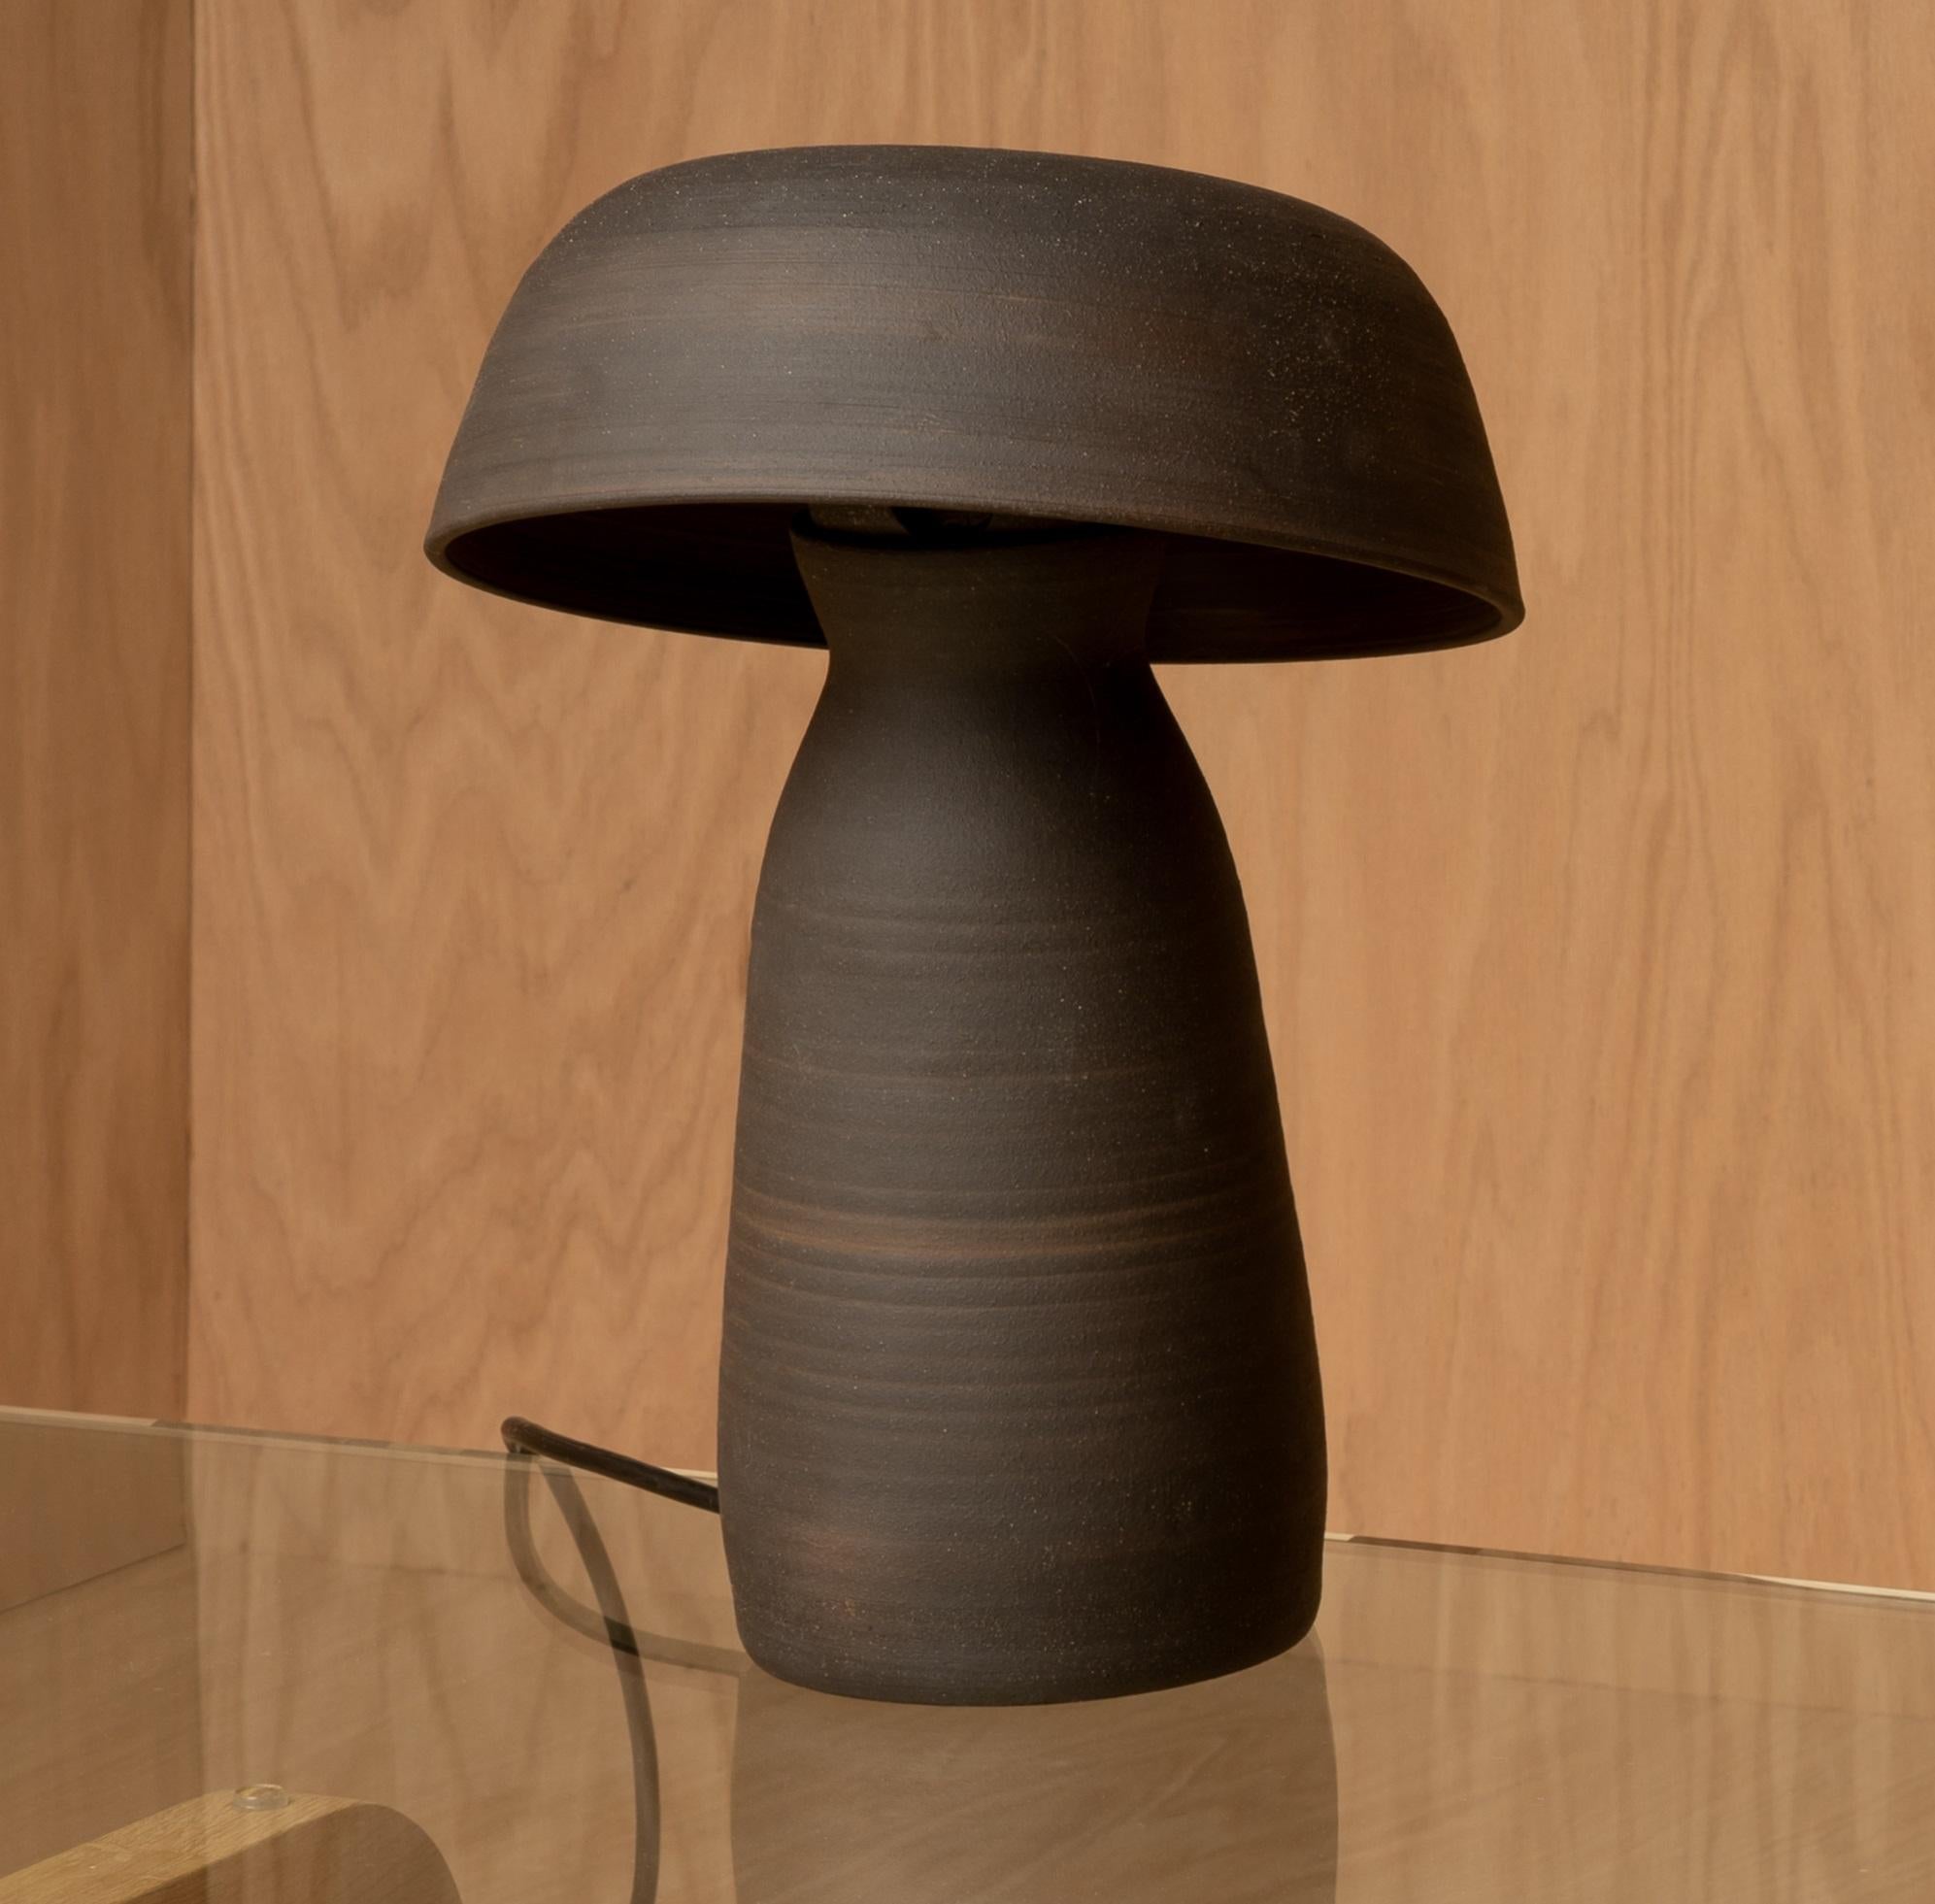 Black Raw Small Mushroom Lamp by Nick Pourfard
Dimensions: Ø 33 x H 38 cm.
Materials: ceramic.
Different finishes available. Please contact us.

All our lamps can be wired according to each country. If sold to the USA it will be wired for the USA